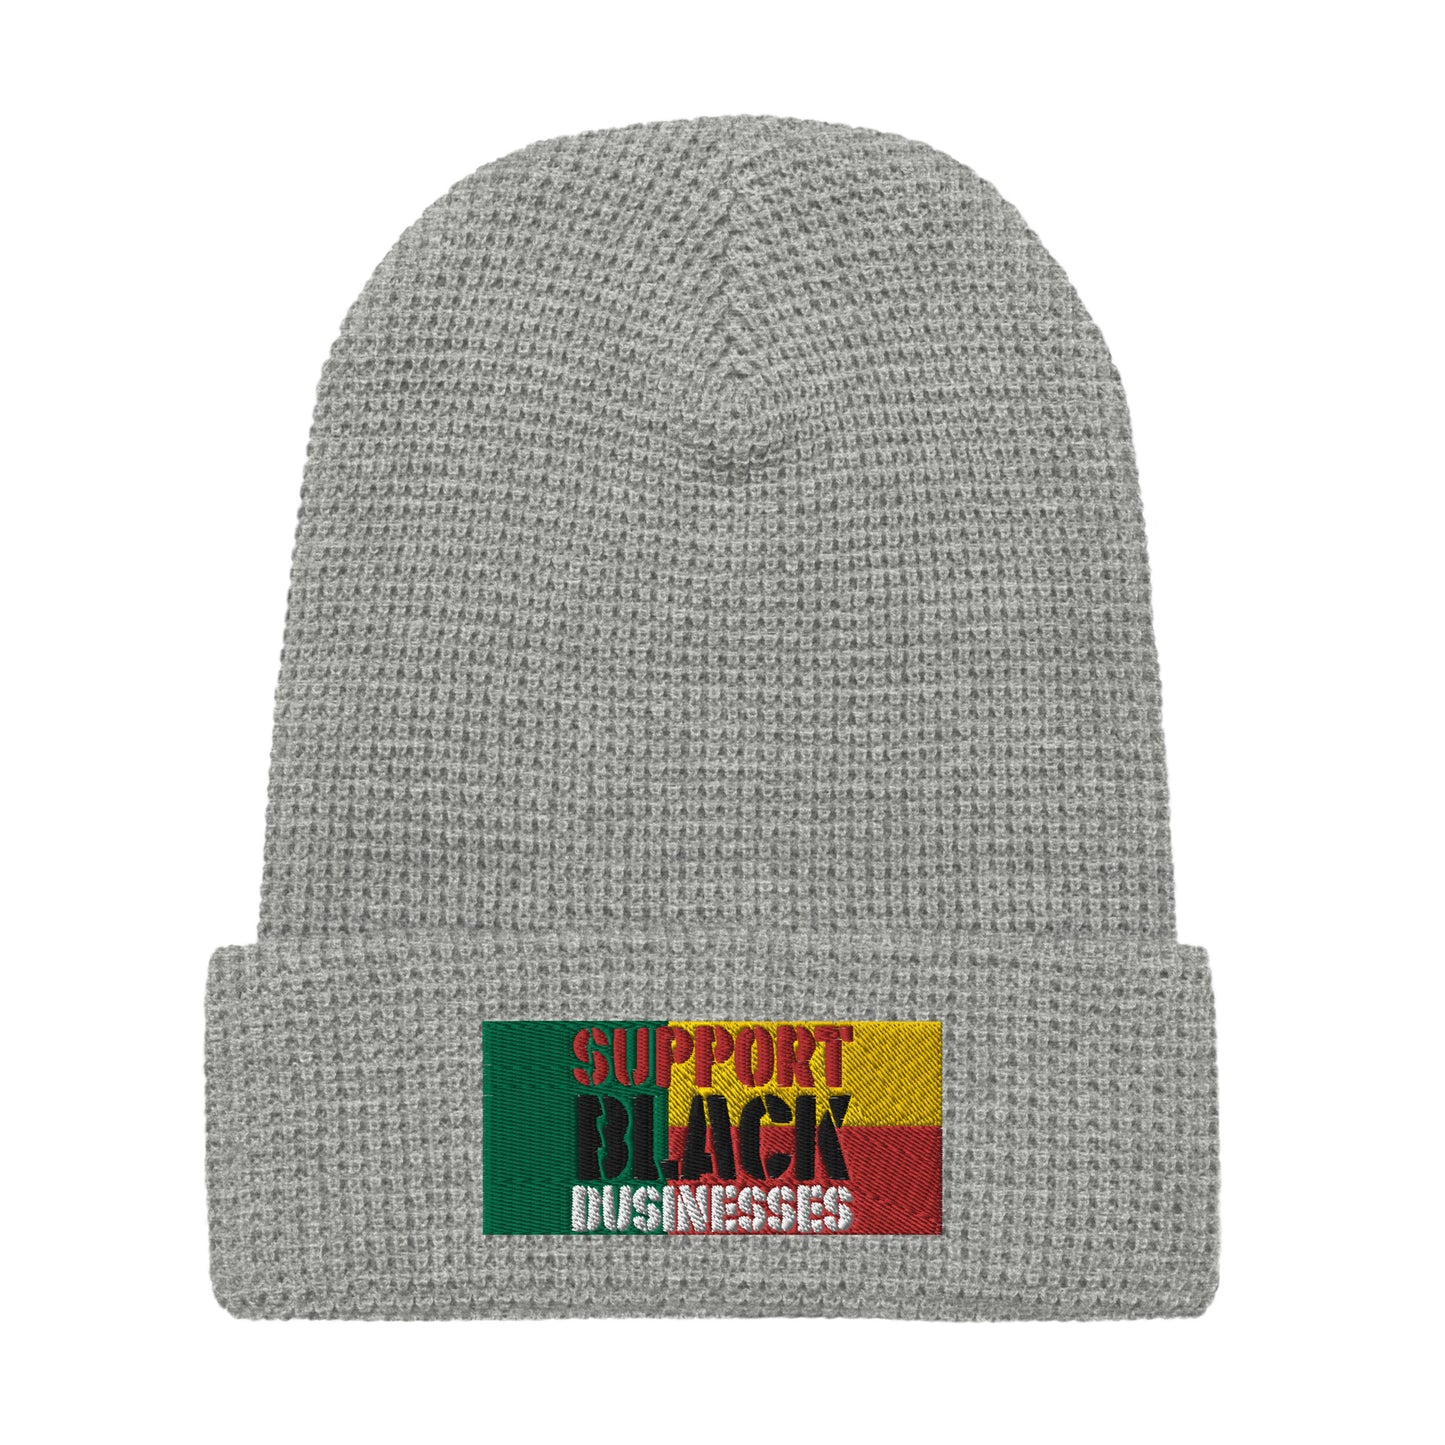 Support BLK businesses Waffle beanie by Teammate Apparel